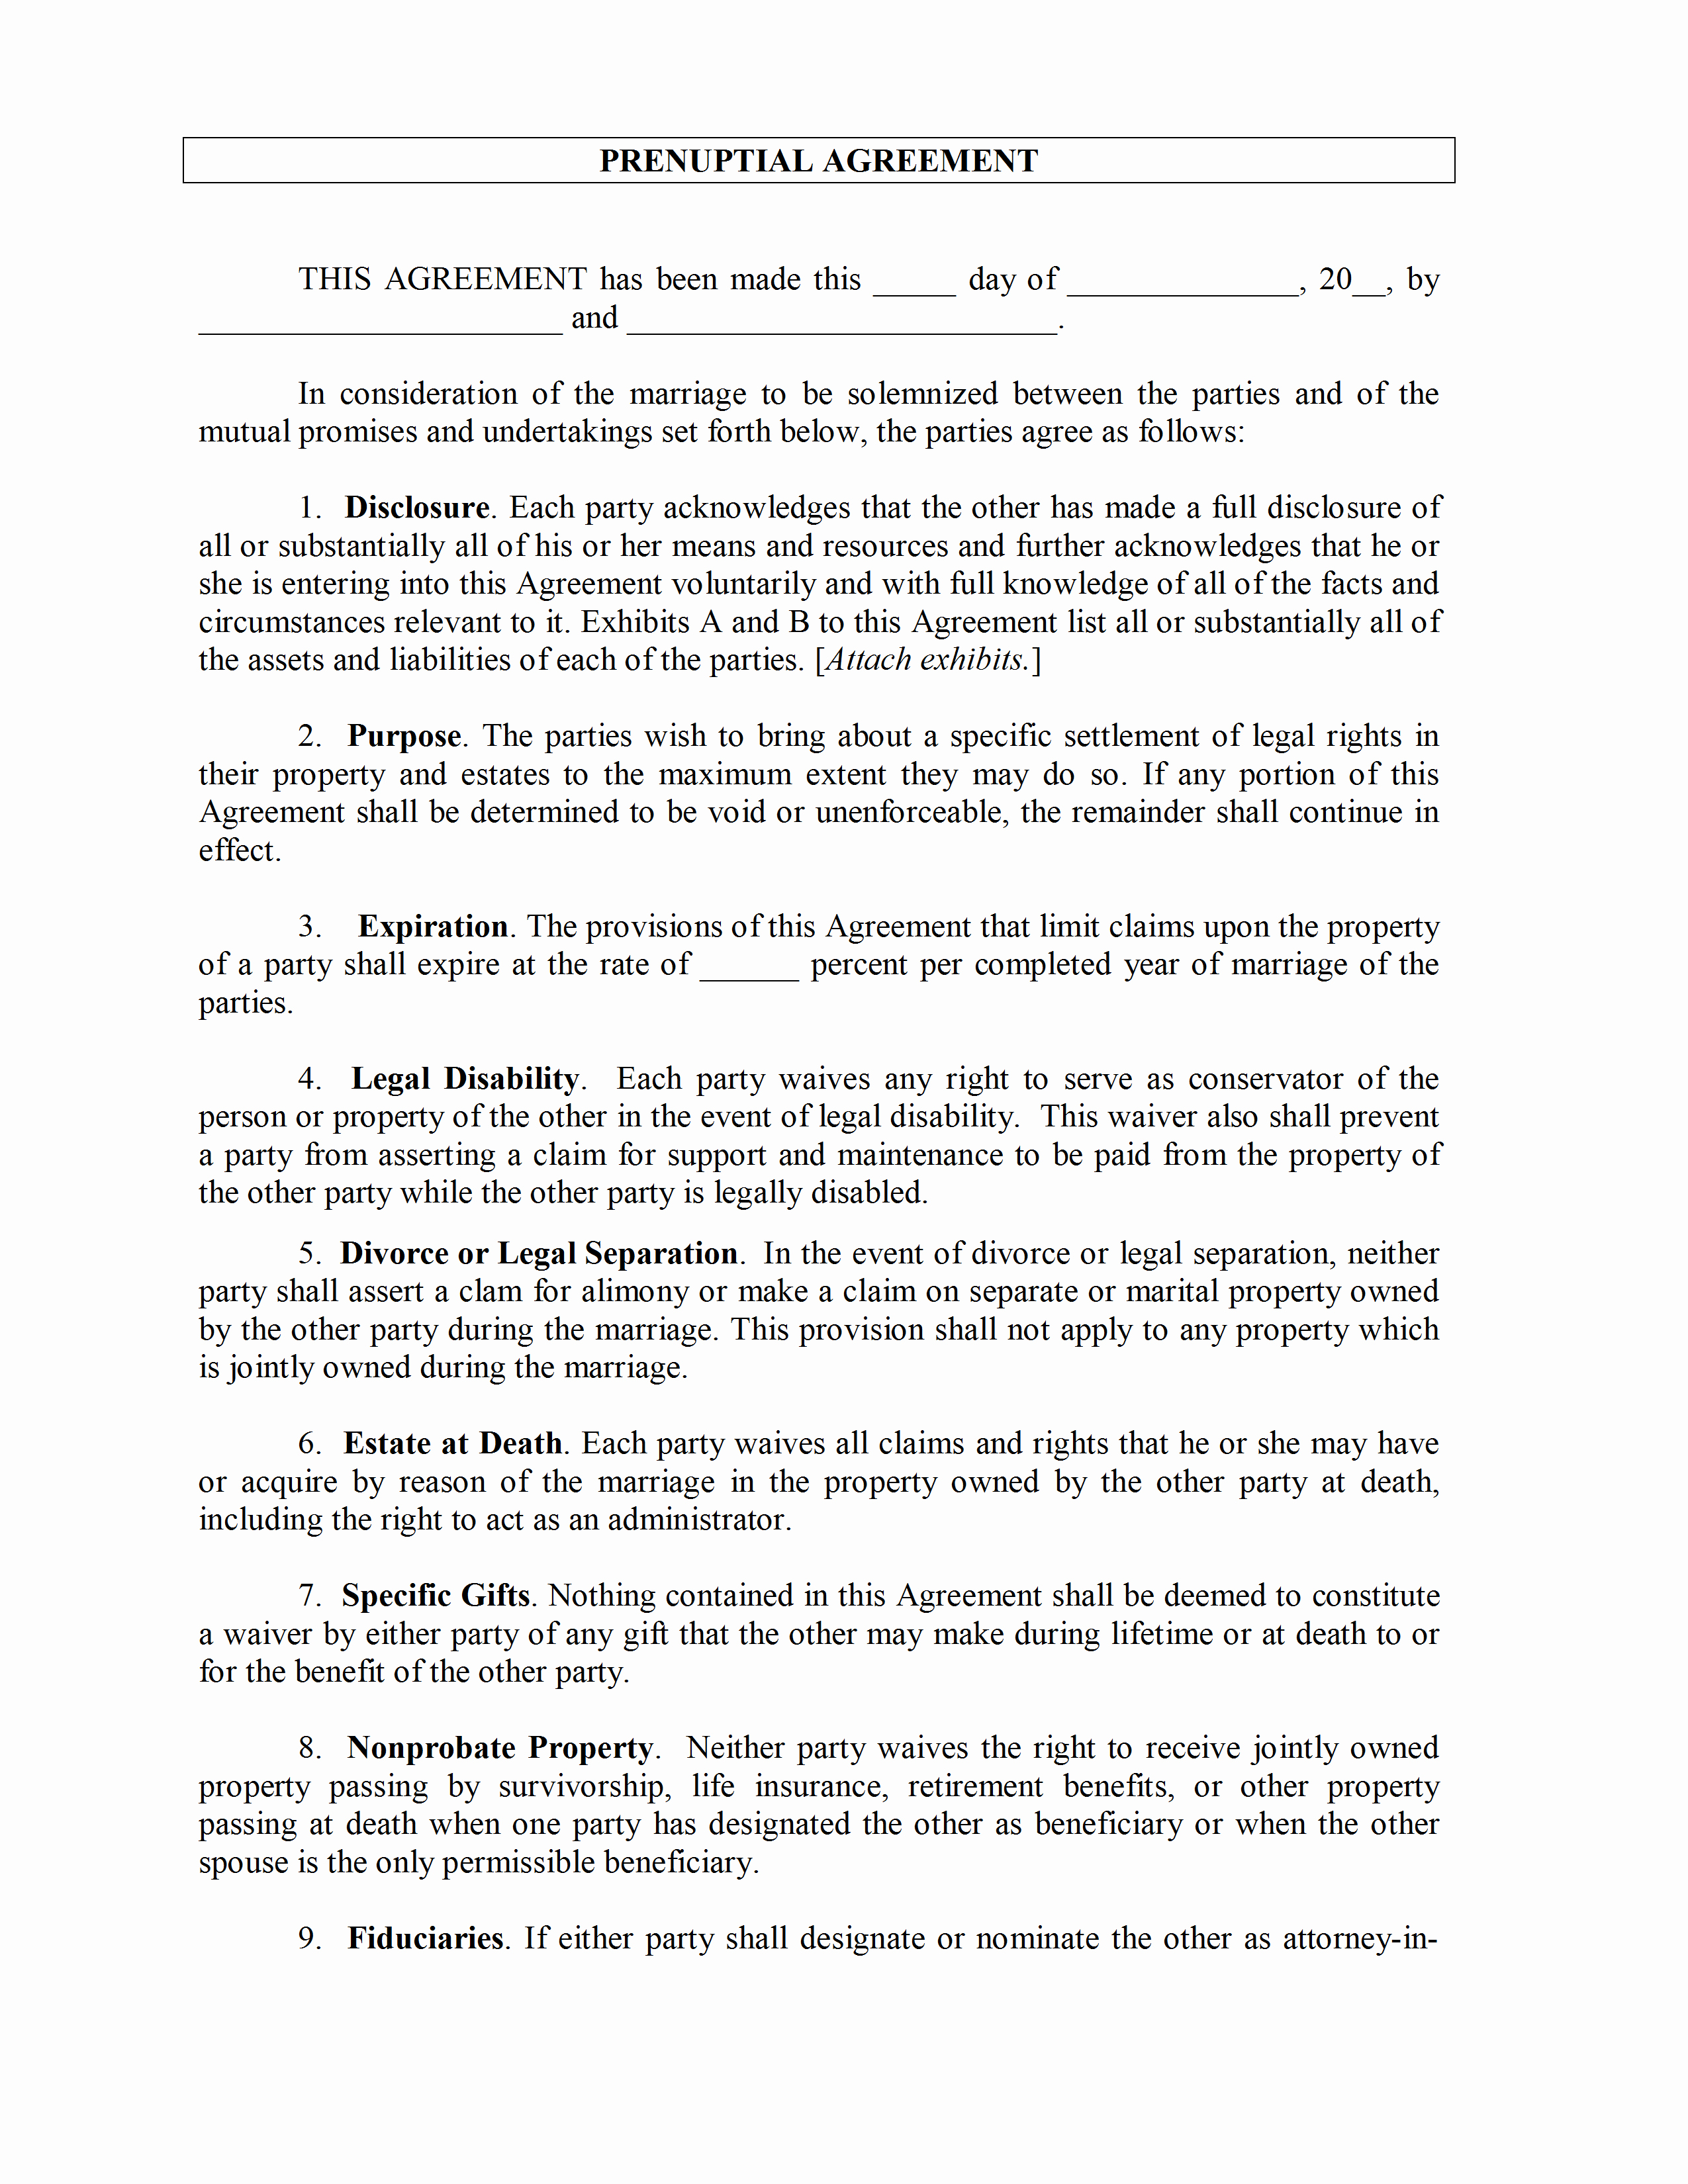 Prenuptial Agreement Sample Pdf Awesome Agreement Word Templates Free Word Templates